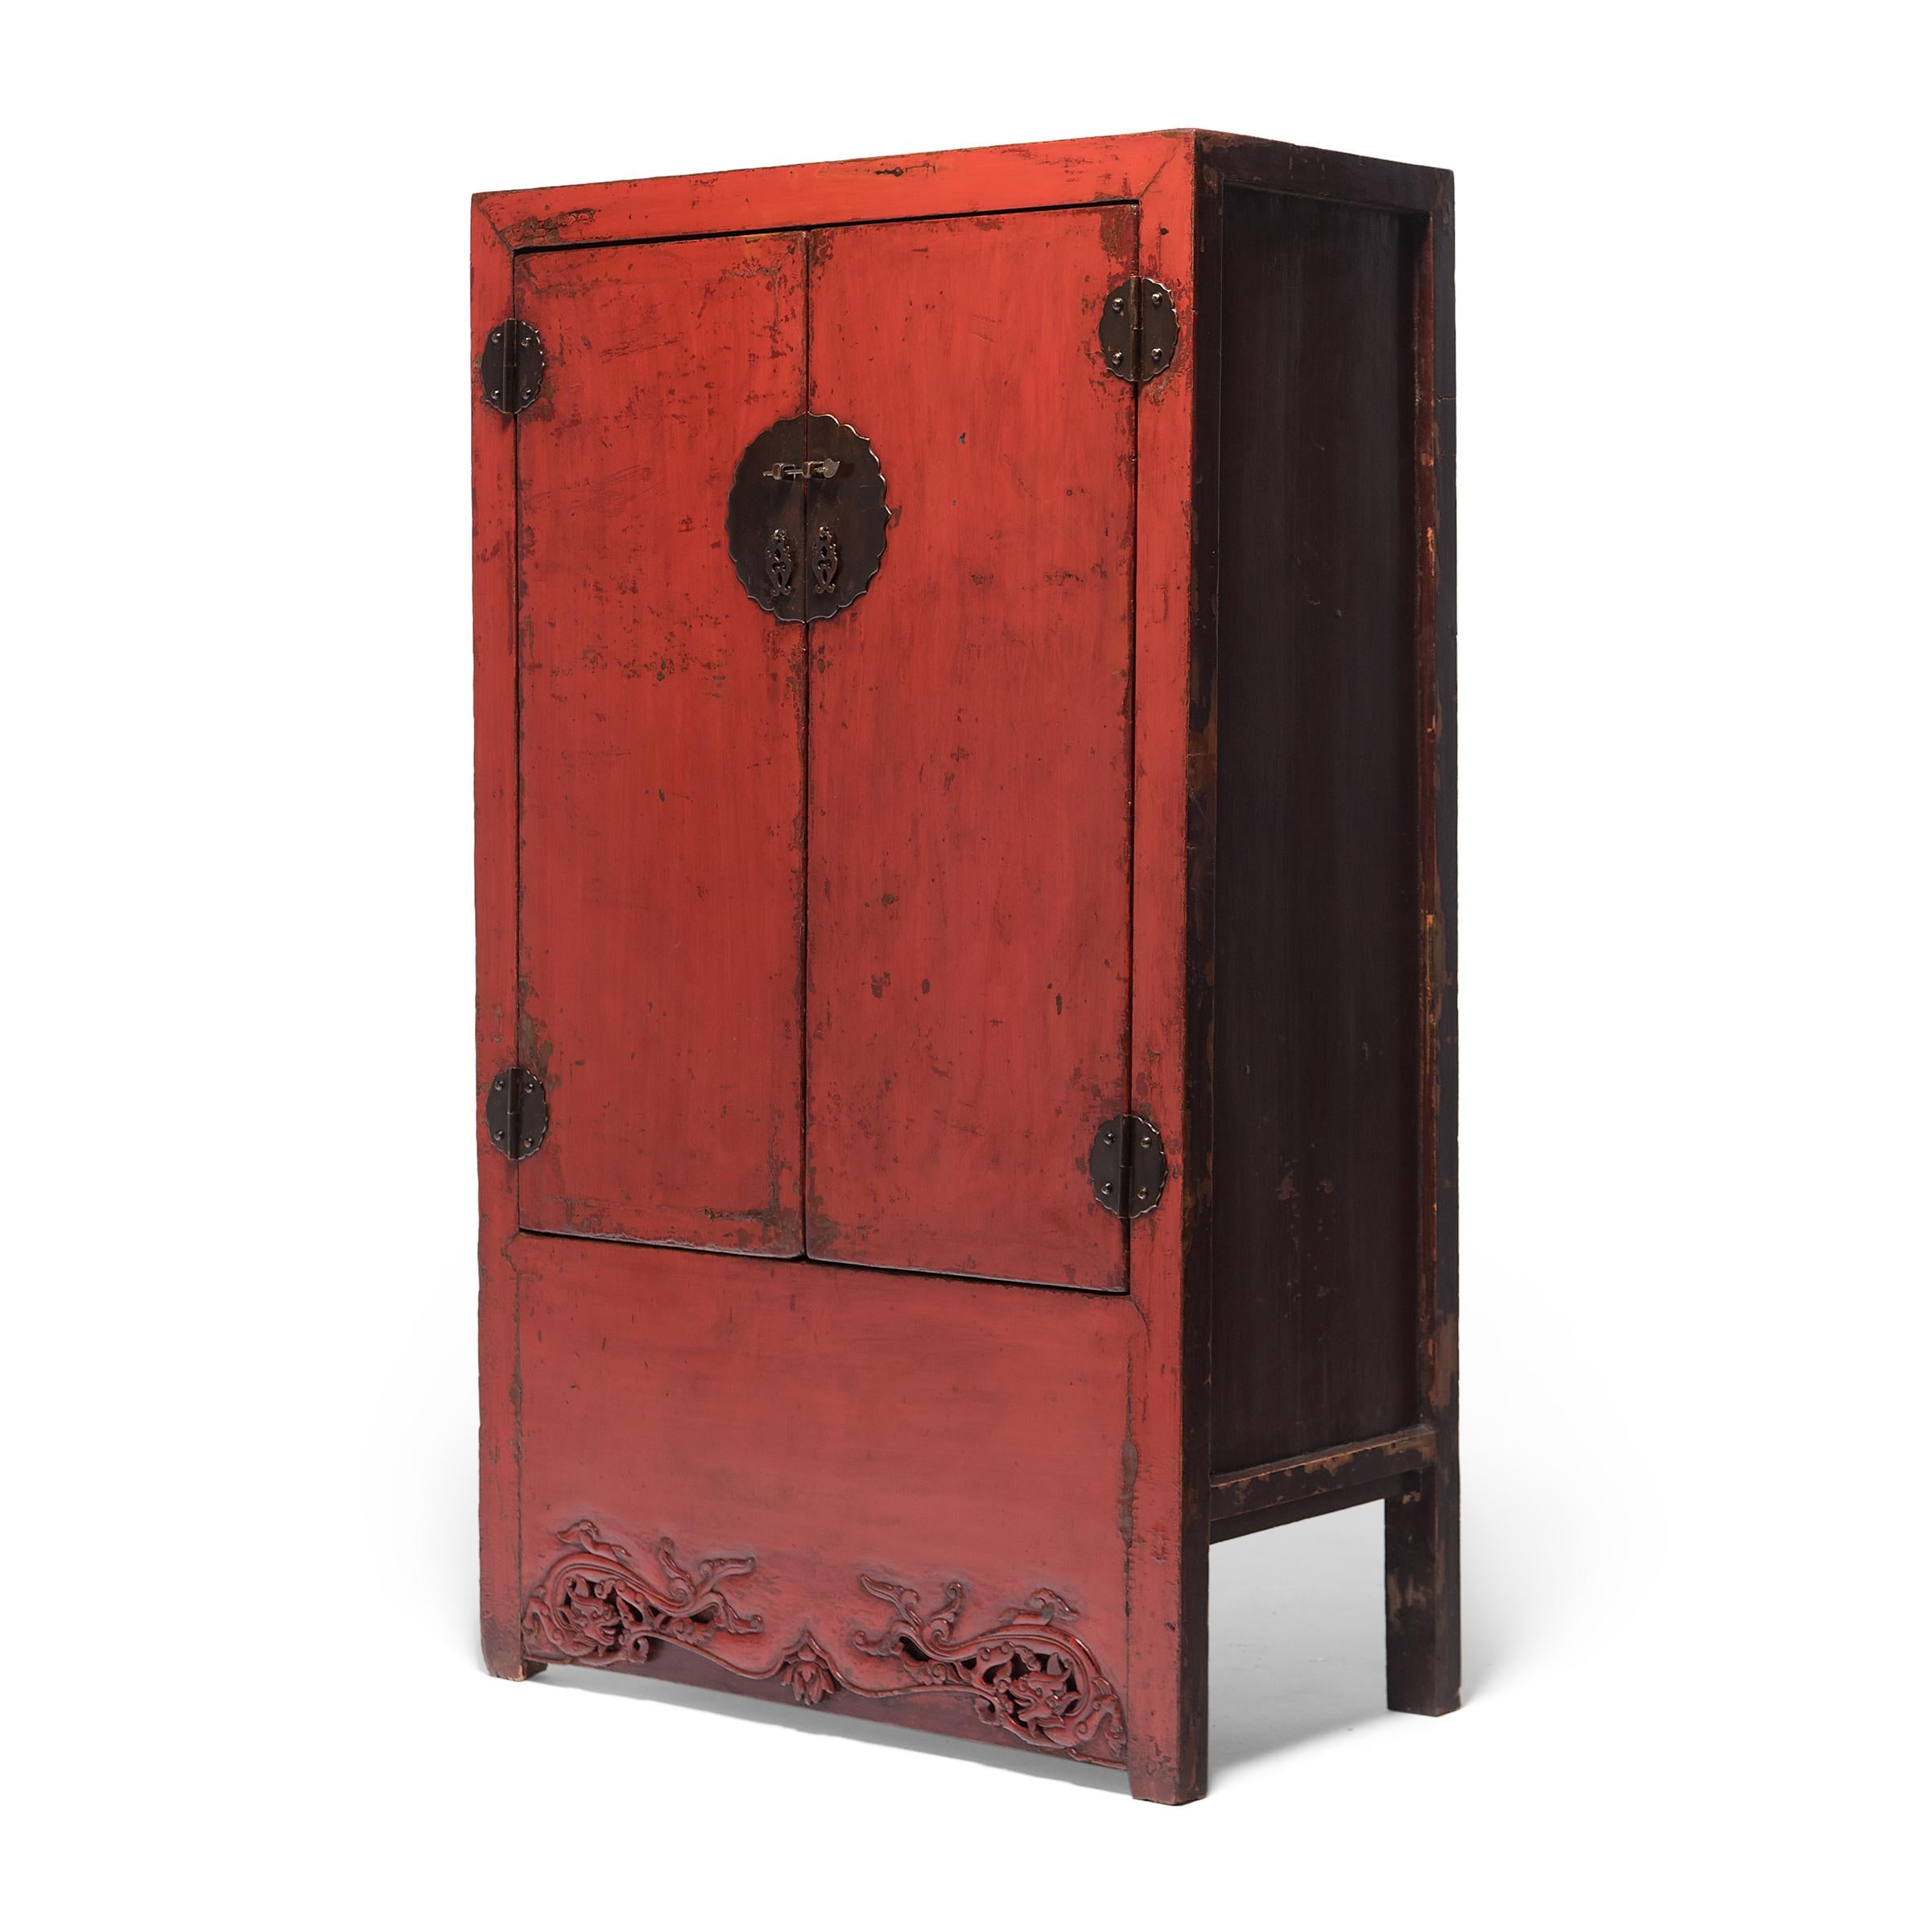 Slightly shorter than most upright Chinese cabinets, this red lacquer cabinet charms with its modest scale and perfect proportions. Dated to the mid-19th century, the cabinet is crafted of northern elmwood (yumu) and brushed on all sides with richly